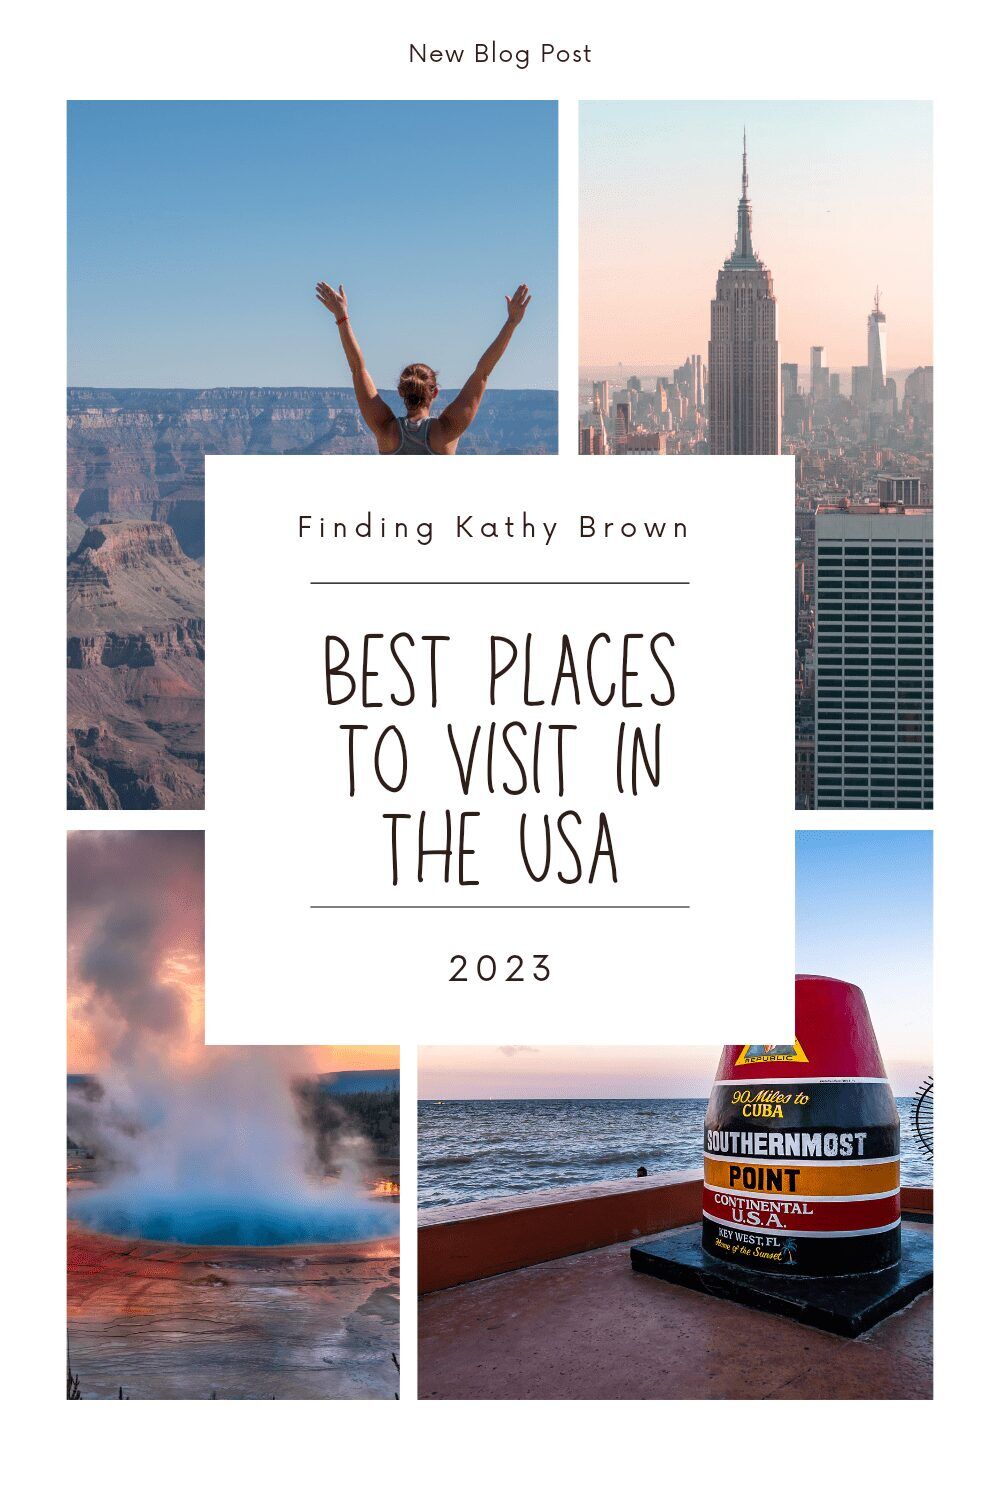 7 Best Places To Visit in USA & More: